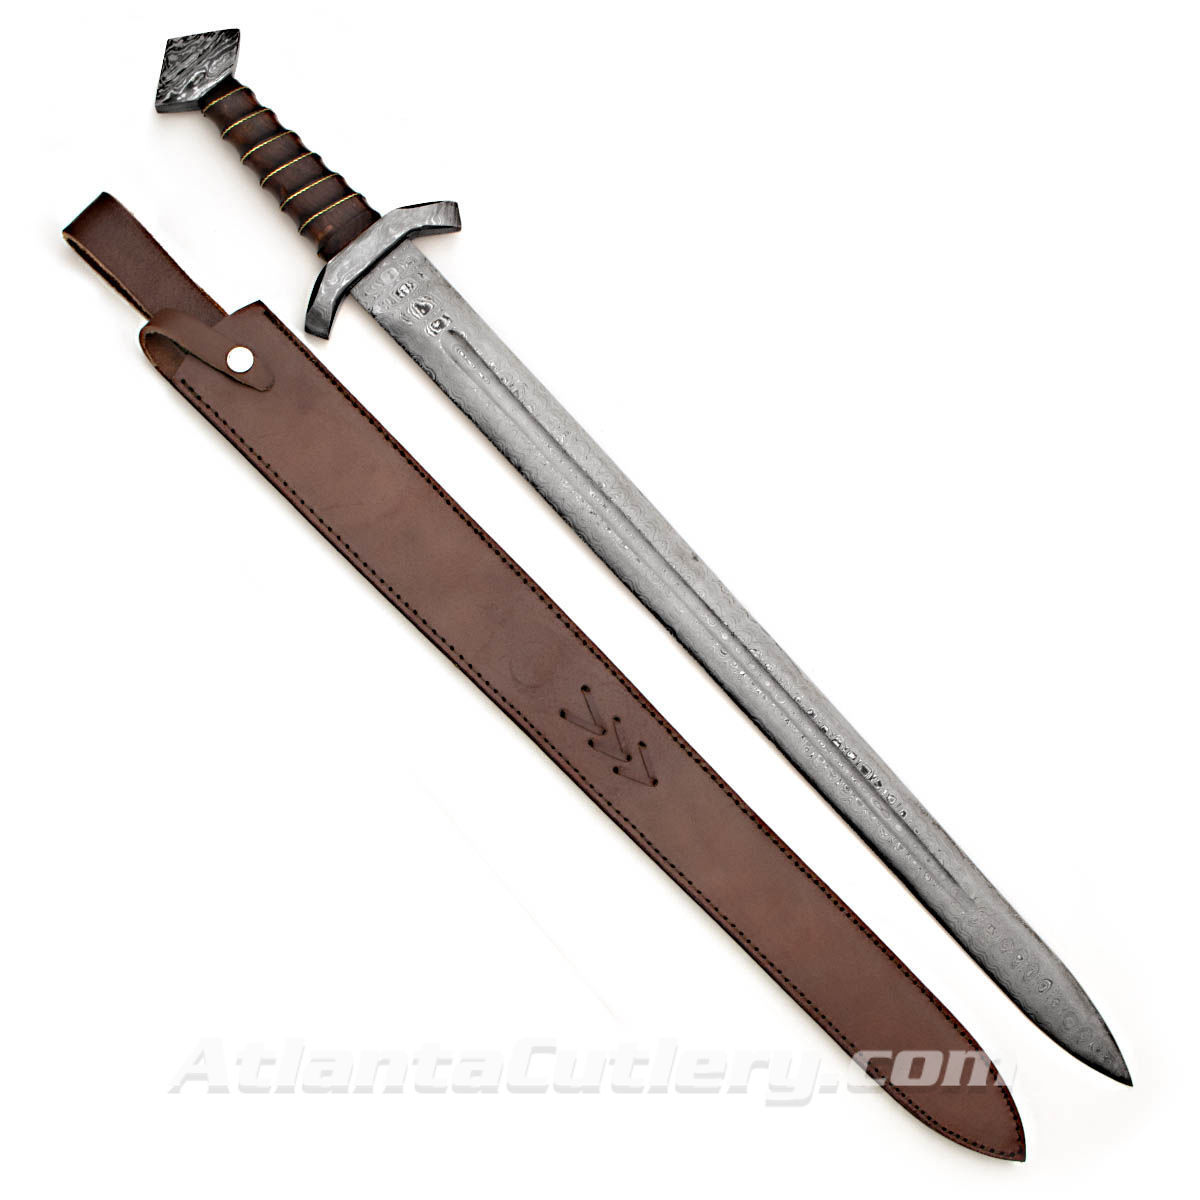 Valhallan Sword with Damascus Blade, Guard and Pommel and Leather Scabbard with Belt Loop and Retaining Strap